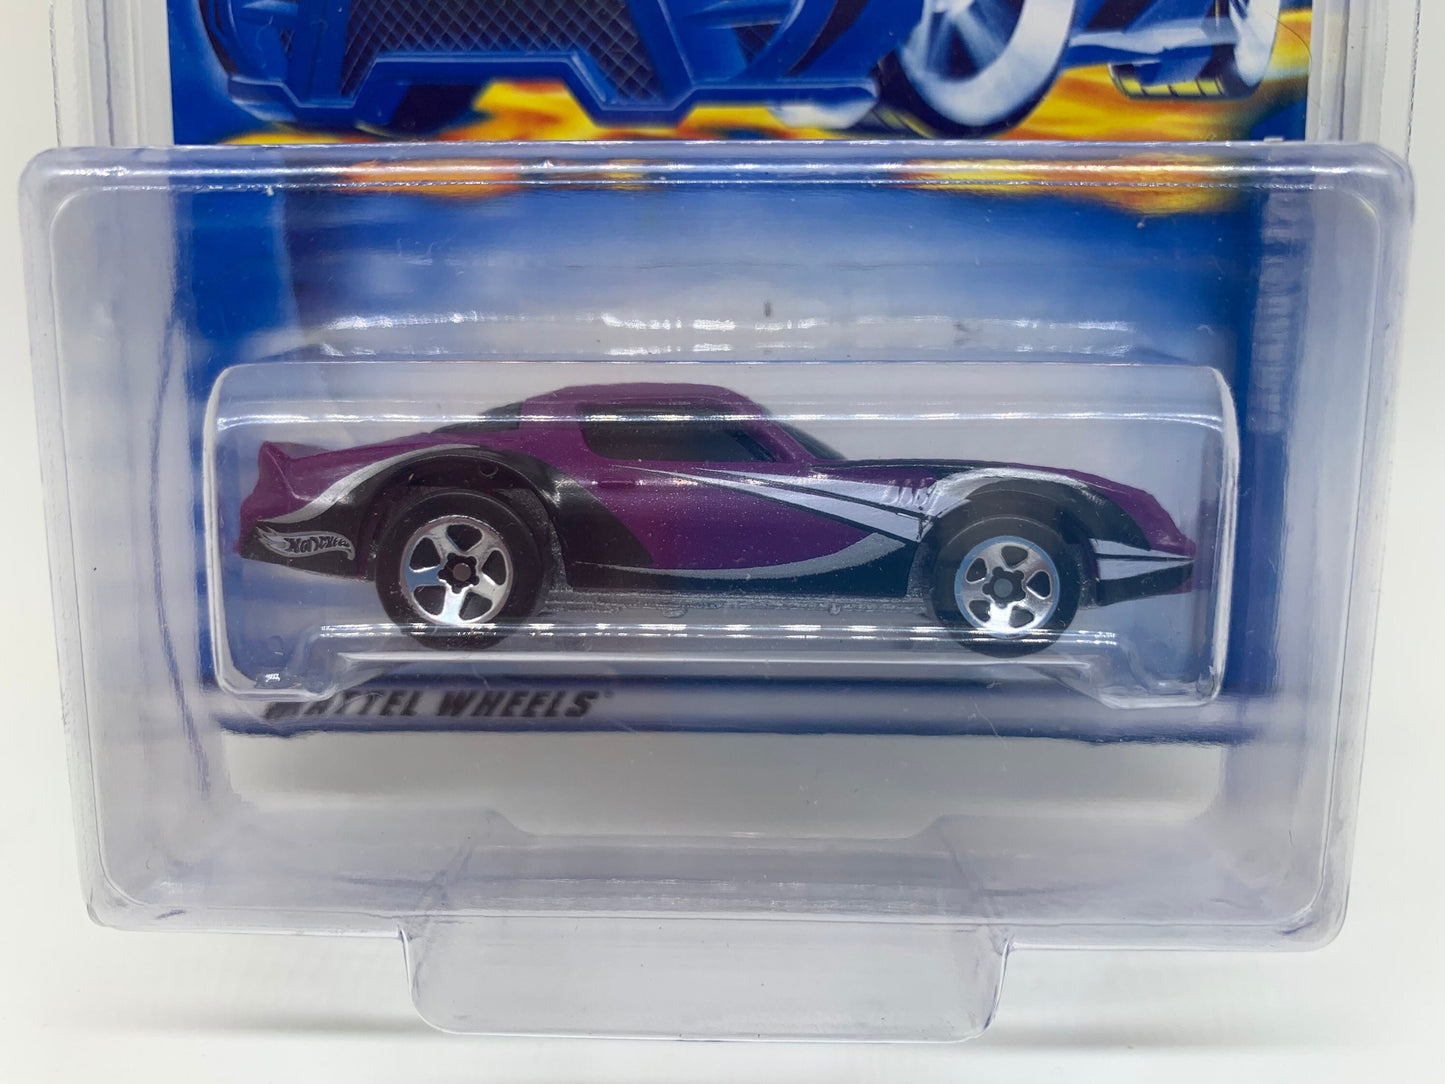 Hot Wheels Camaro Z28 Purple Mainline Collector #146 ZAMAC Miniature Collectable Model Toy Car Perfect Birthday Gift